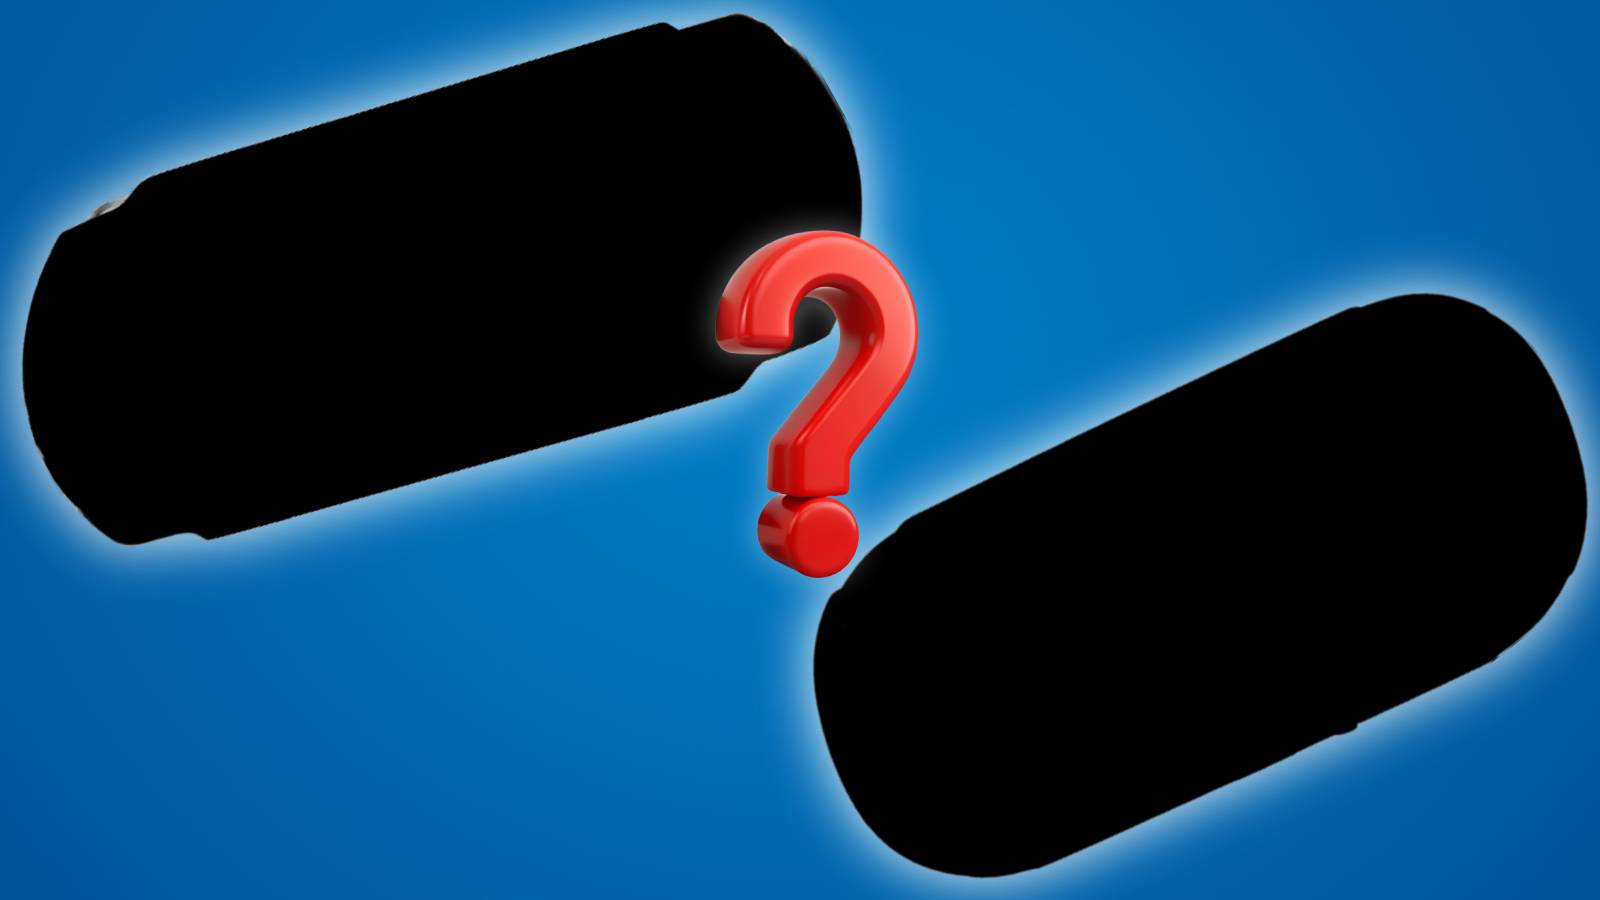 Image of the silhouette of the Sony PSP and PS Vita on a blue background with a question mark in the center.